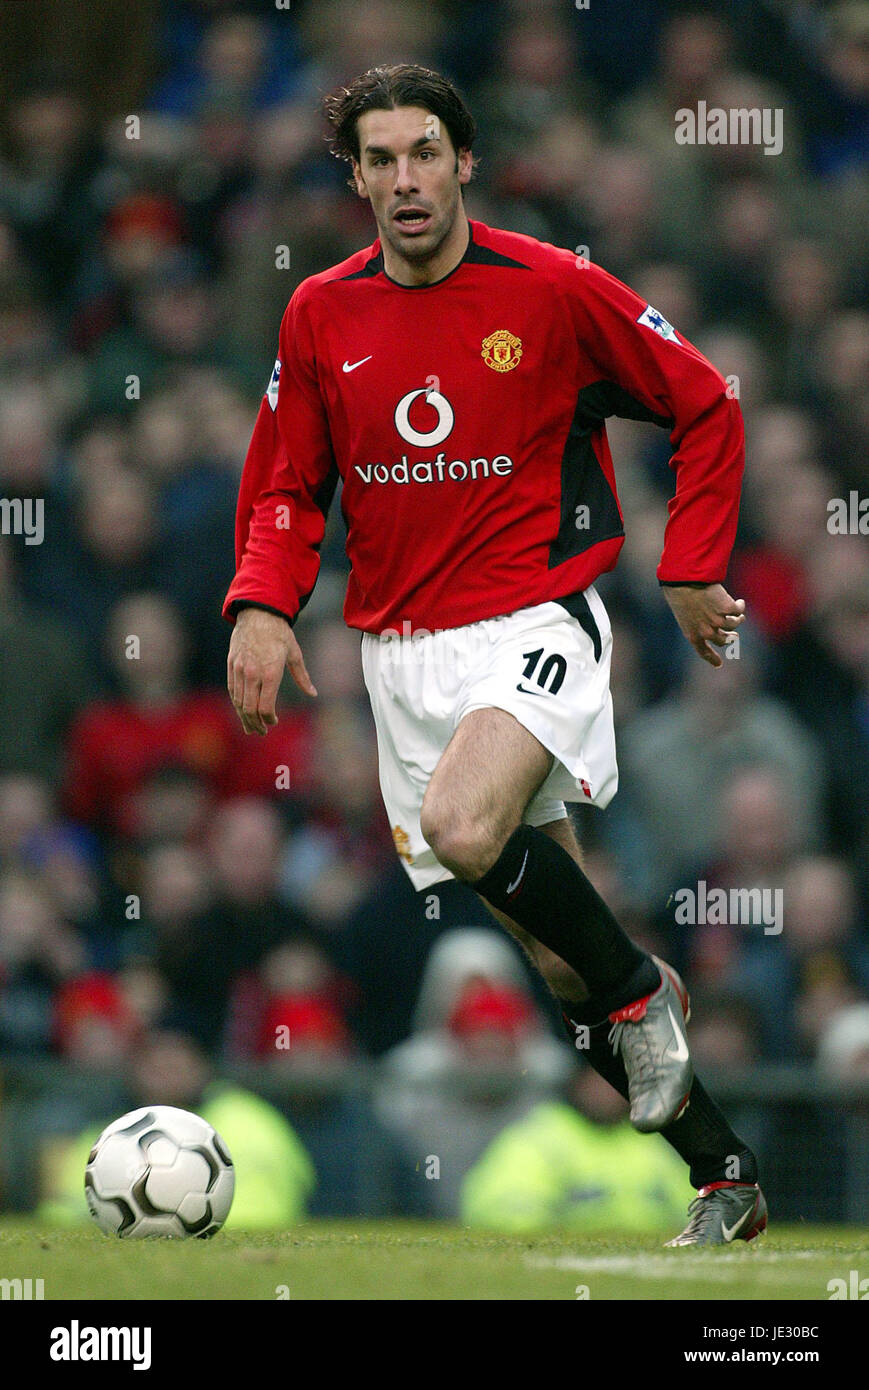 RUUD VAN NISTELROOY MANCHESTER UNITED FC OLD TRAFFORD MANCESTER 06 December 2002 Stock Photo